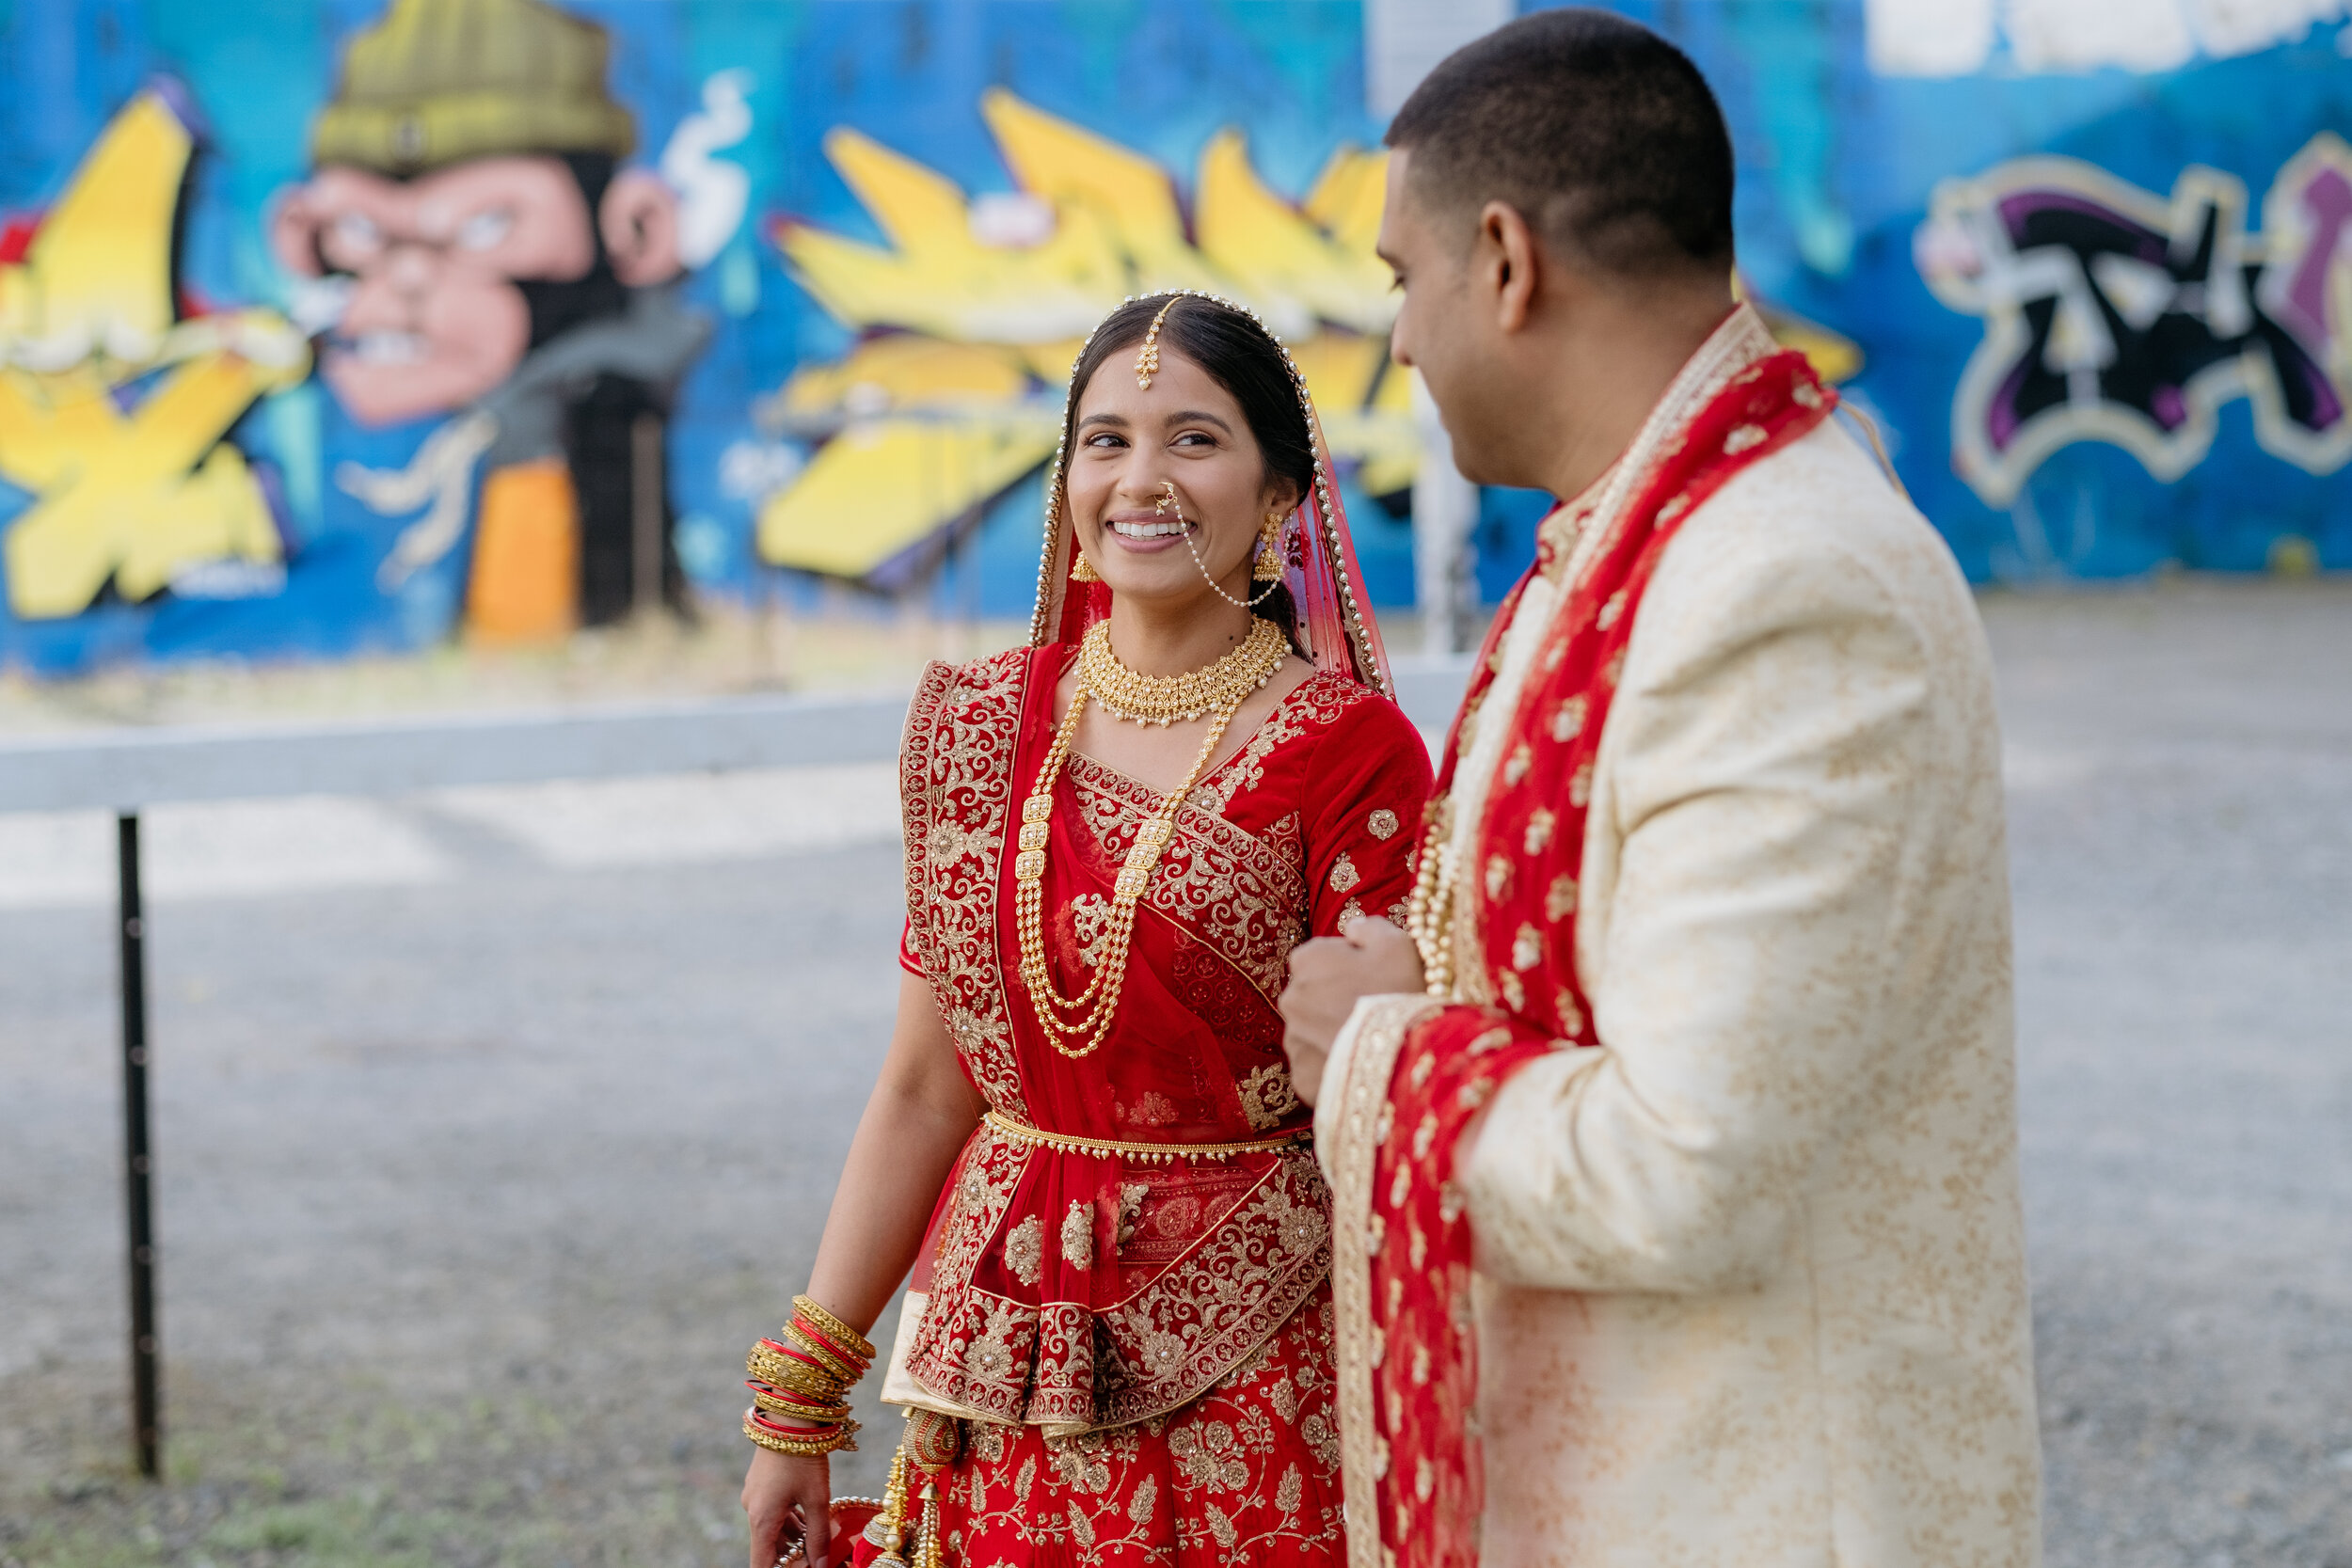 Red and gold Hindu wedding outfits